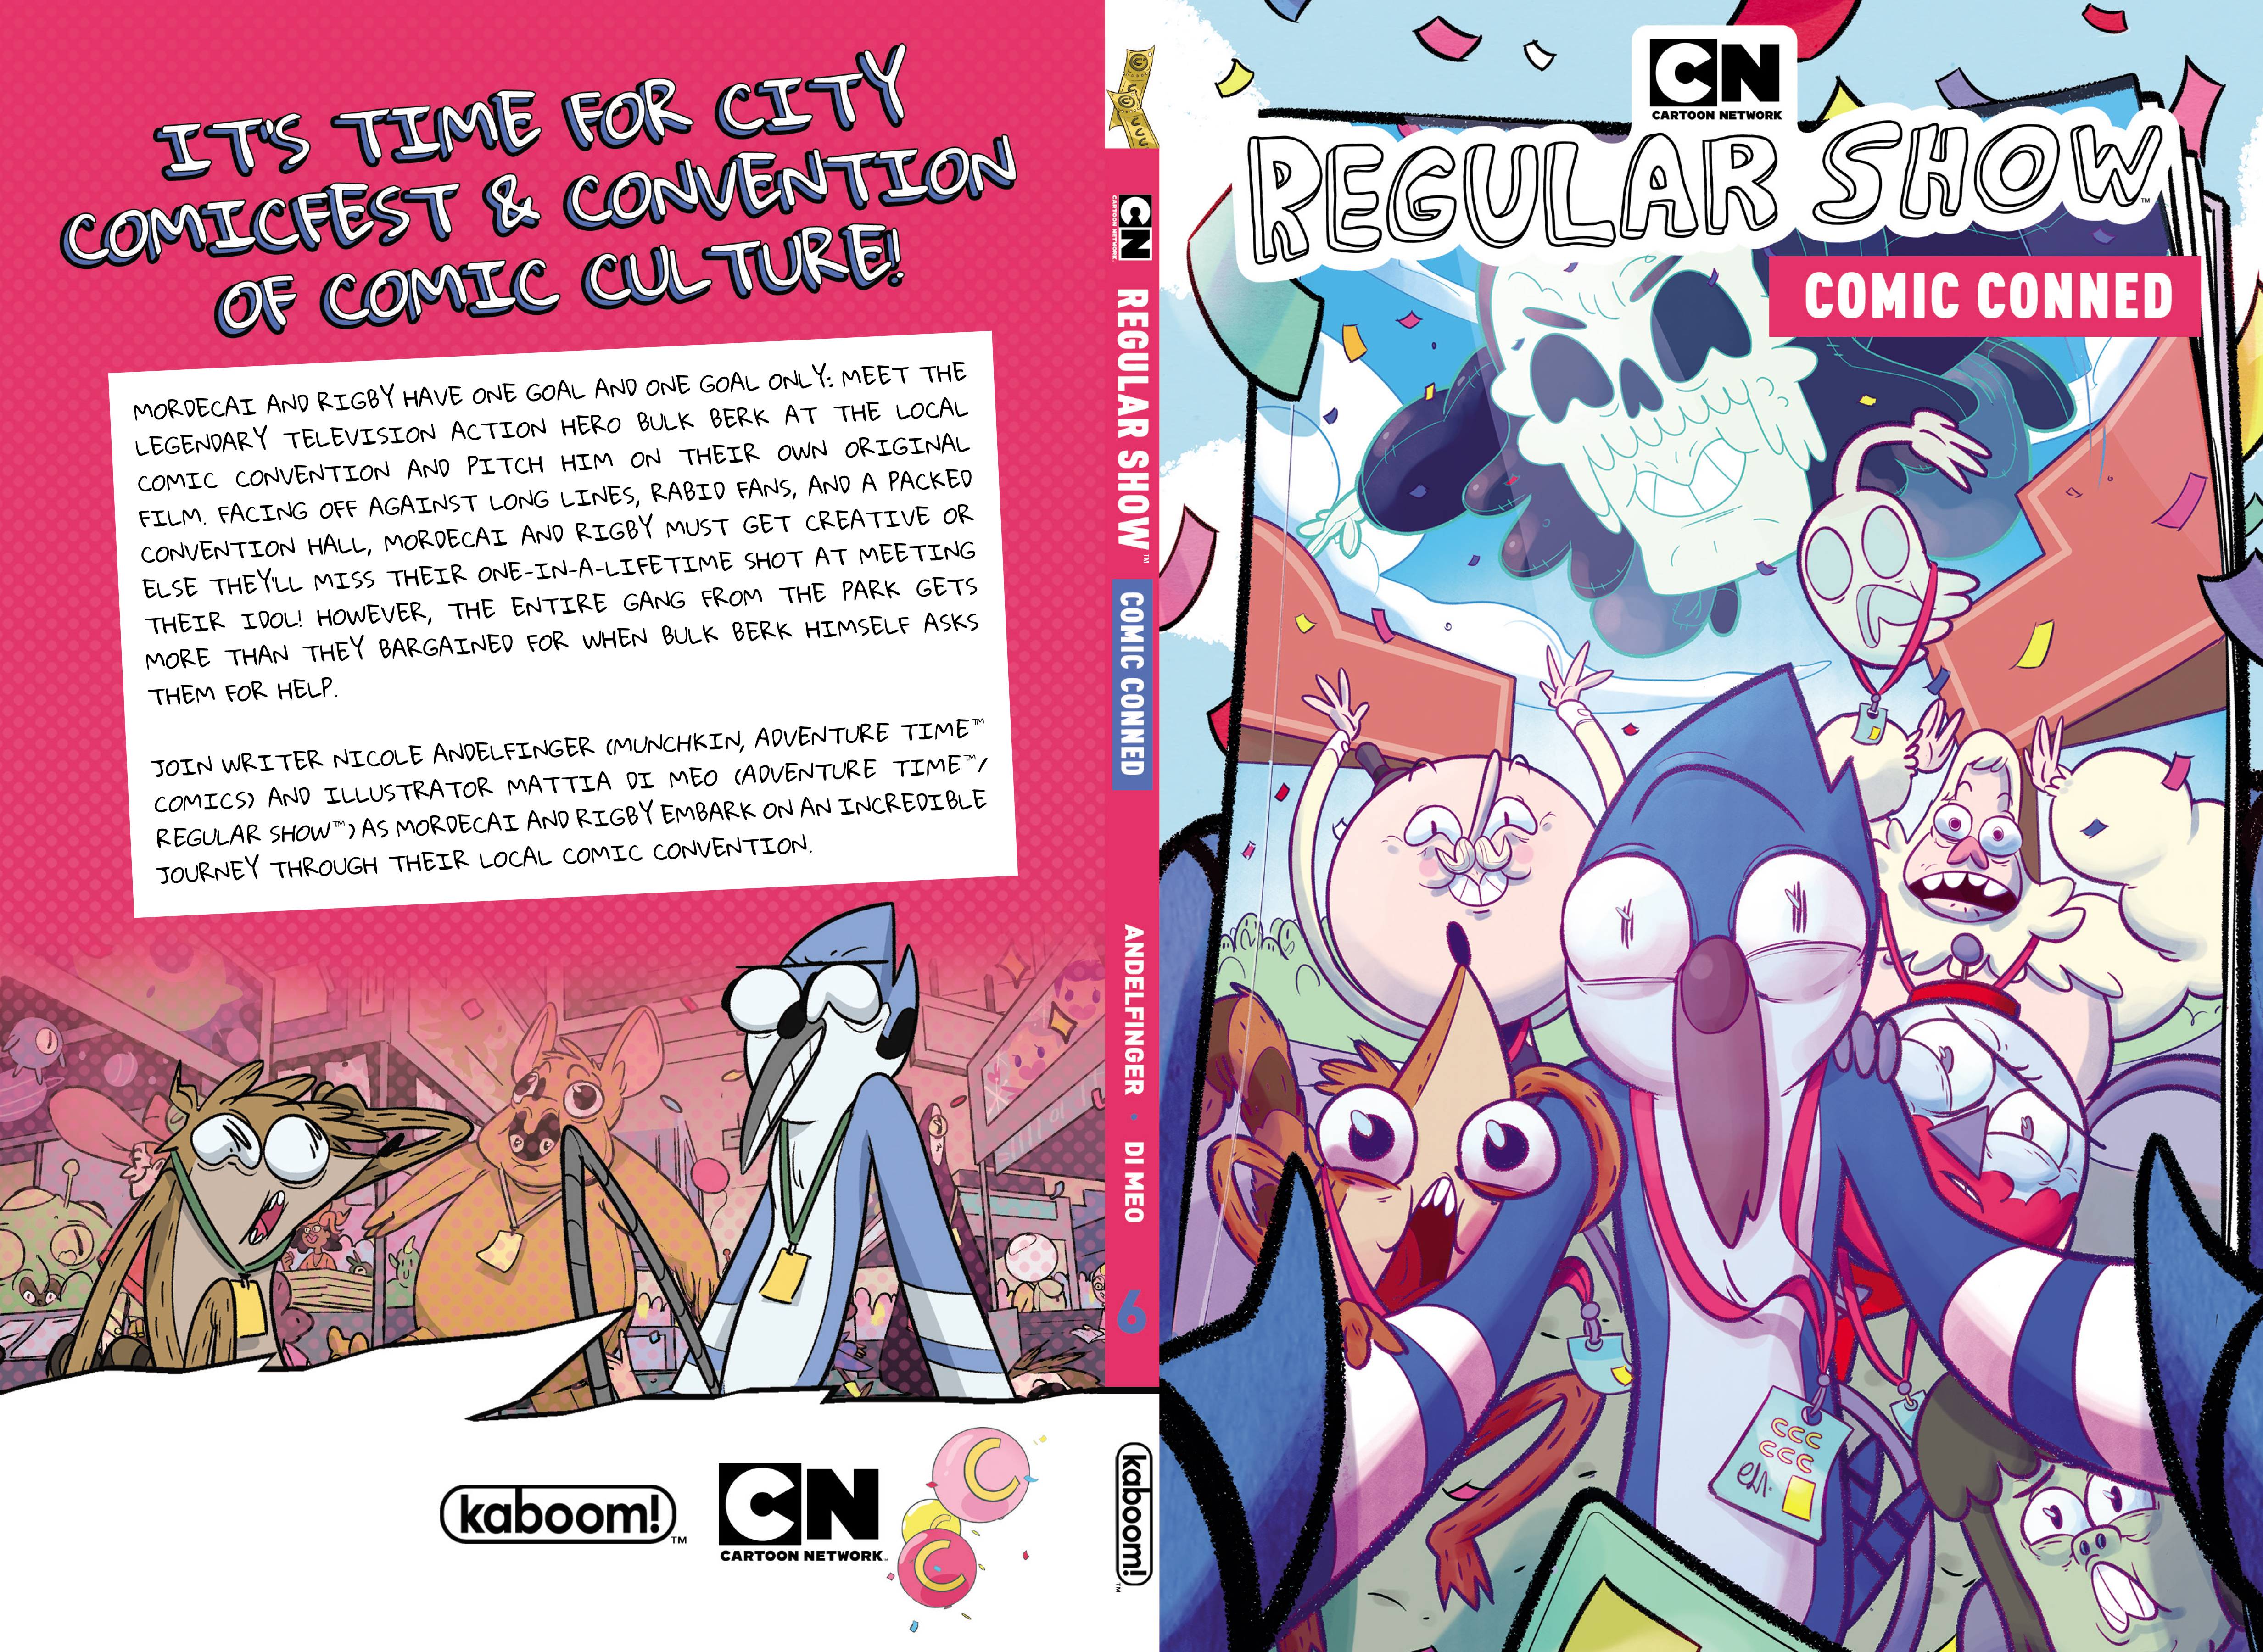 Read online Regular Show: Comic Conned comic -  Issue # TPB - 1